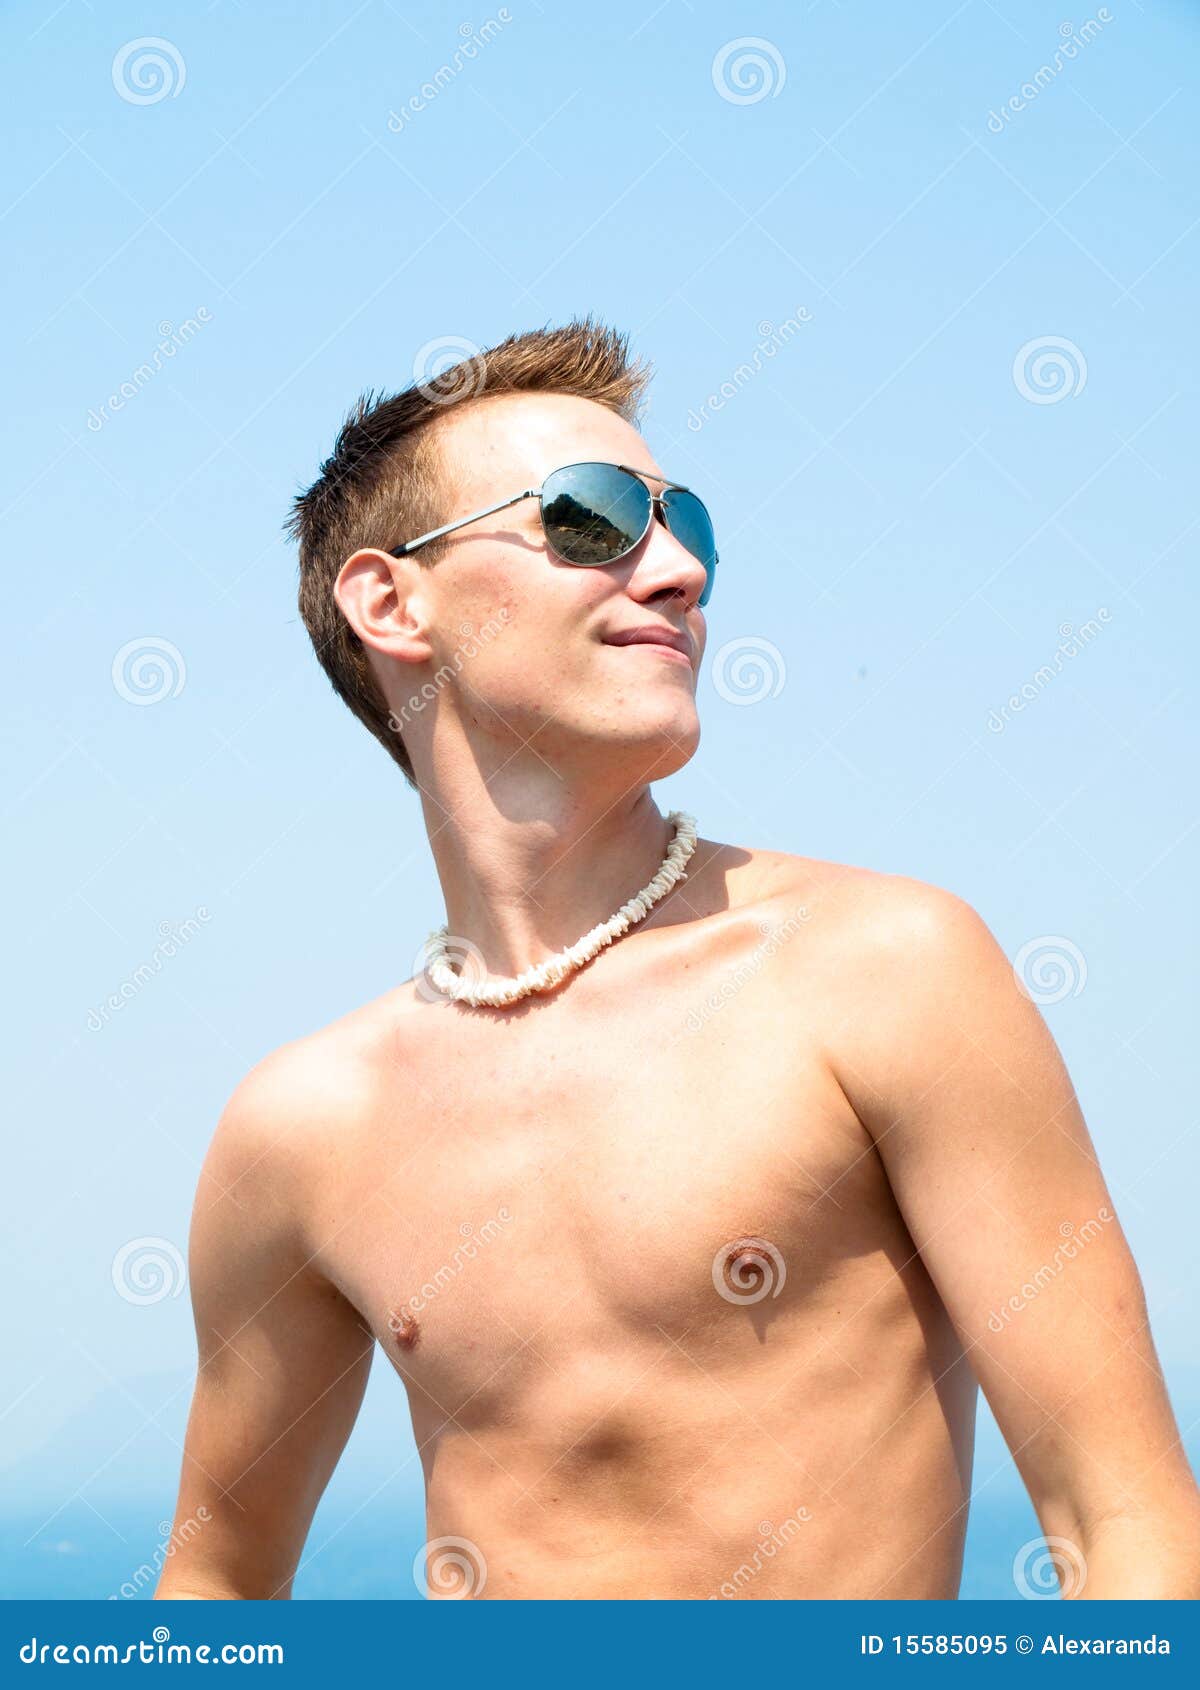 Young Man At The Beach Royalty Free Stock Photo - Image: 15585095